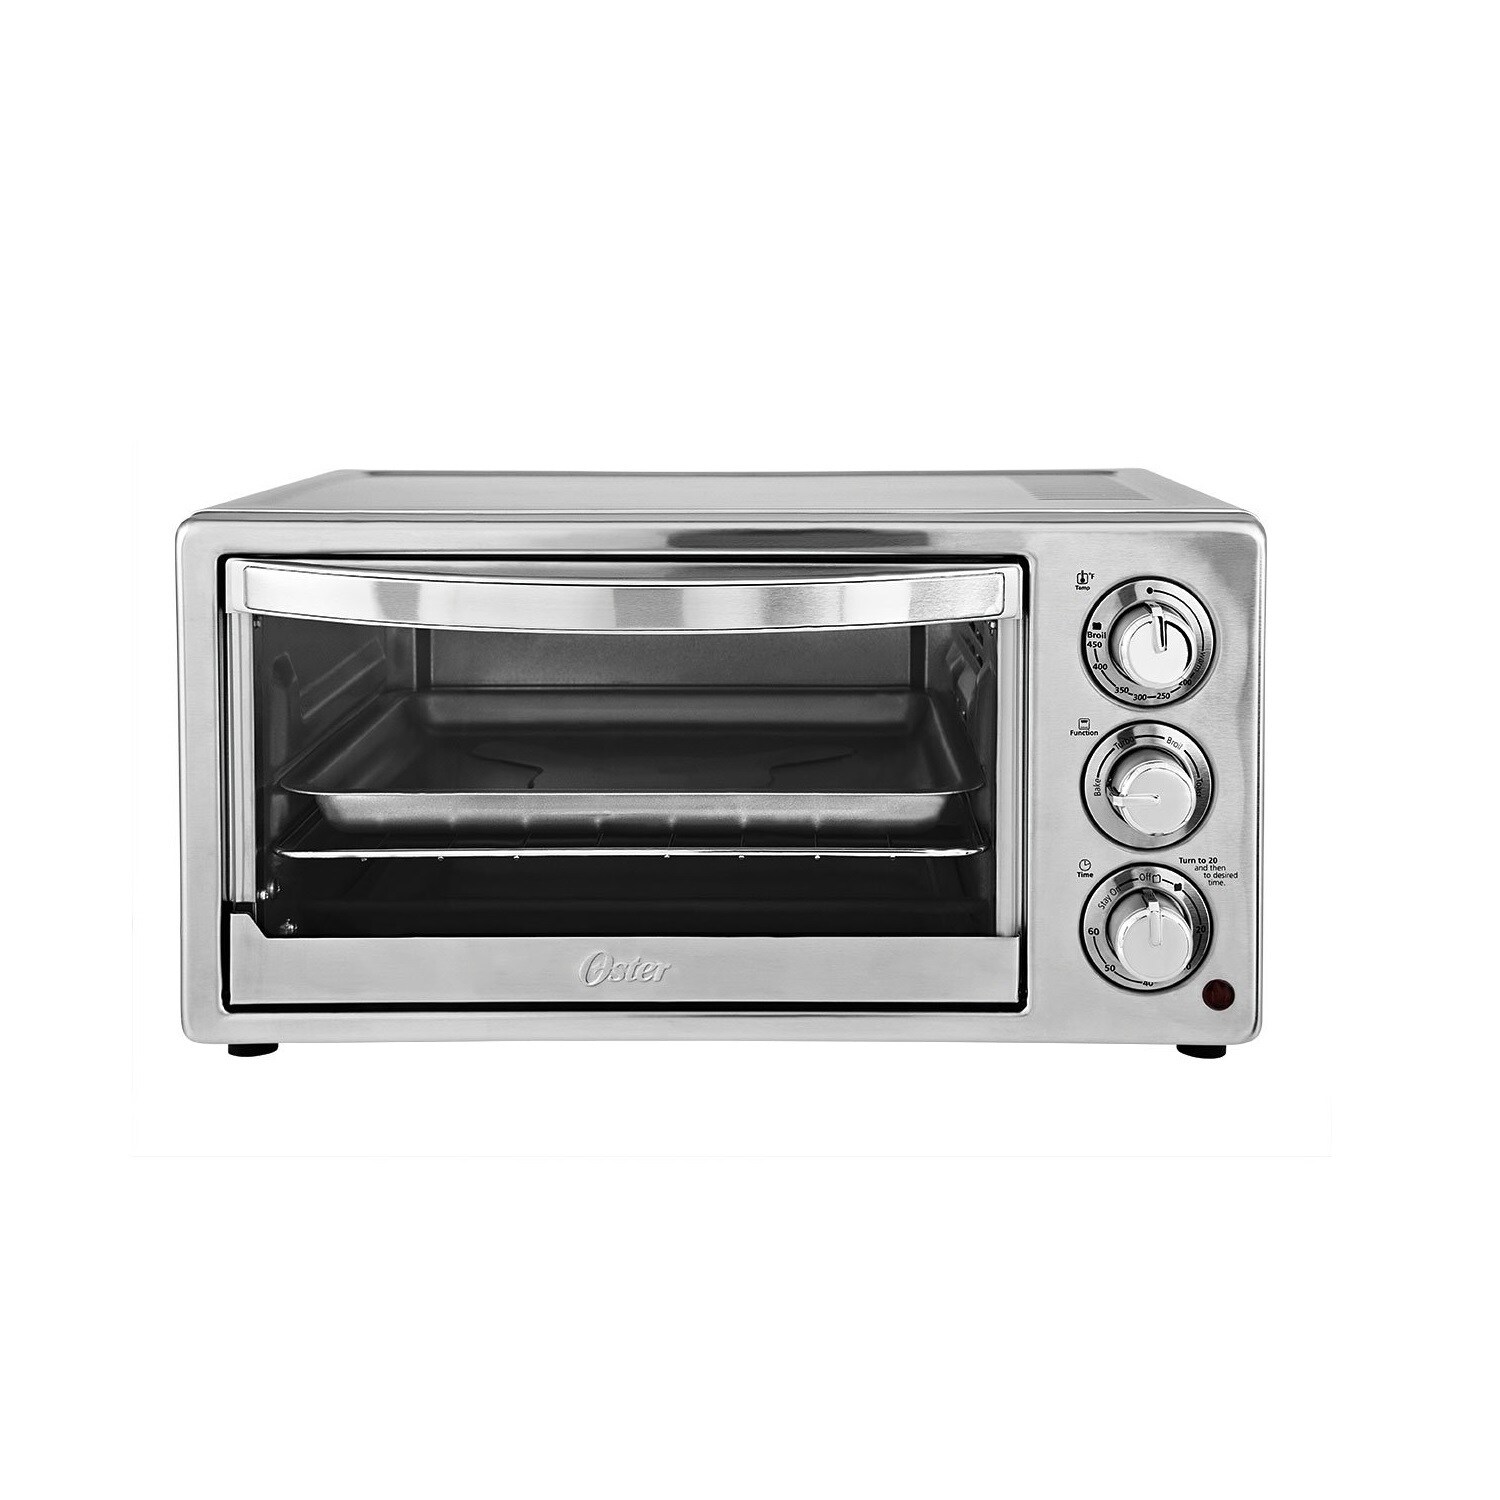 Shop Oster Toaster Oven Overstock 16340952